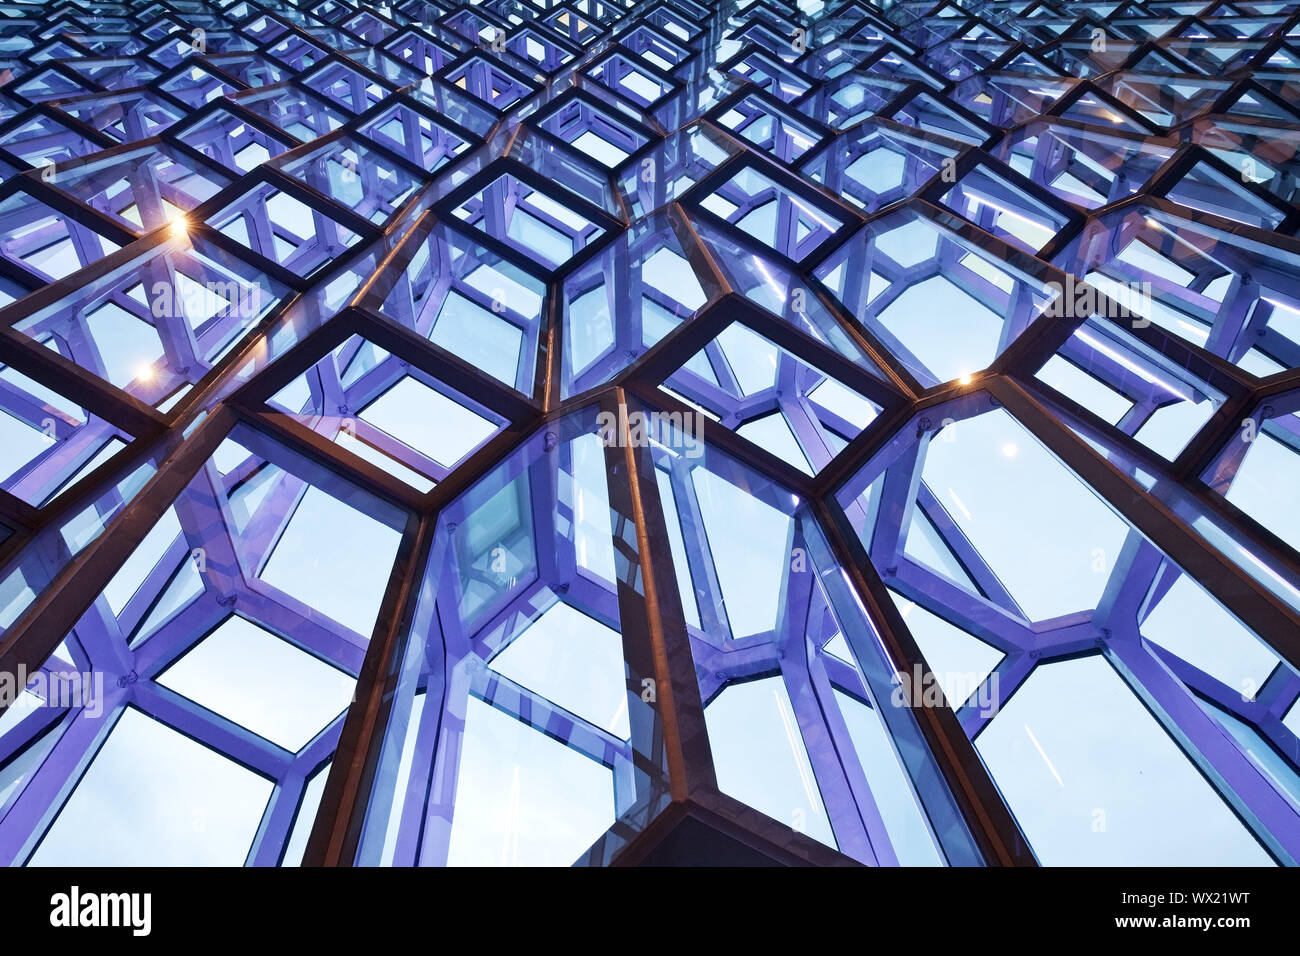 Illuminated facade detail of the honeycomb structure, concert hall Harpa, Reykjavik, Iceland, Europe Stock Photo